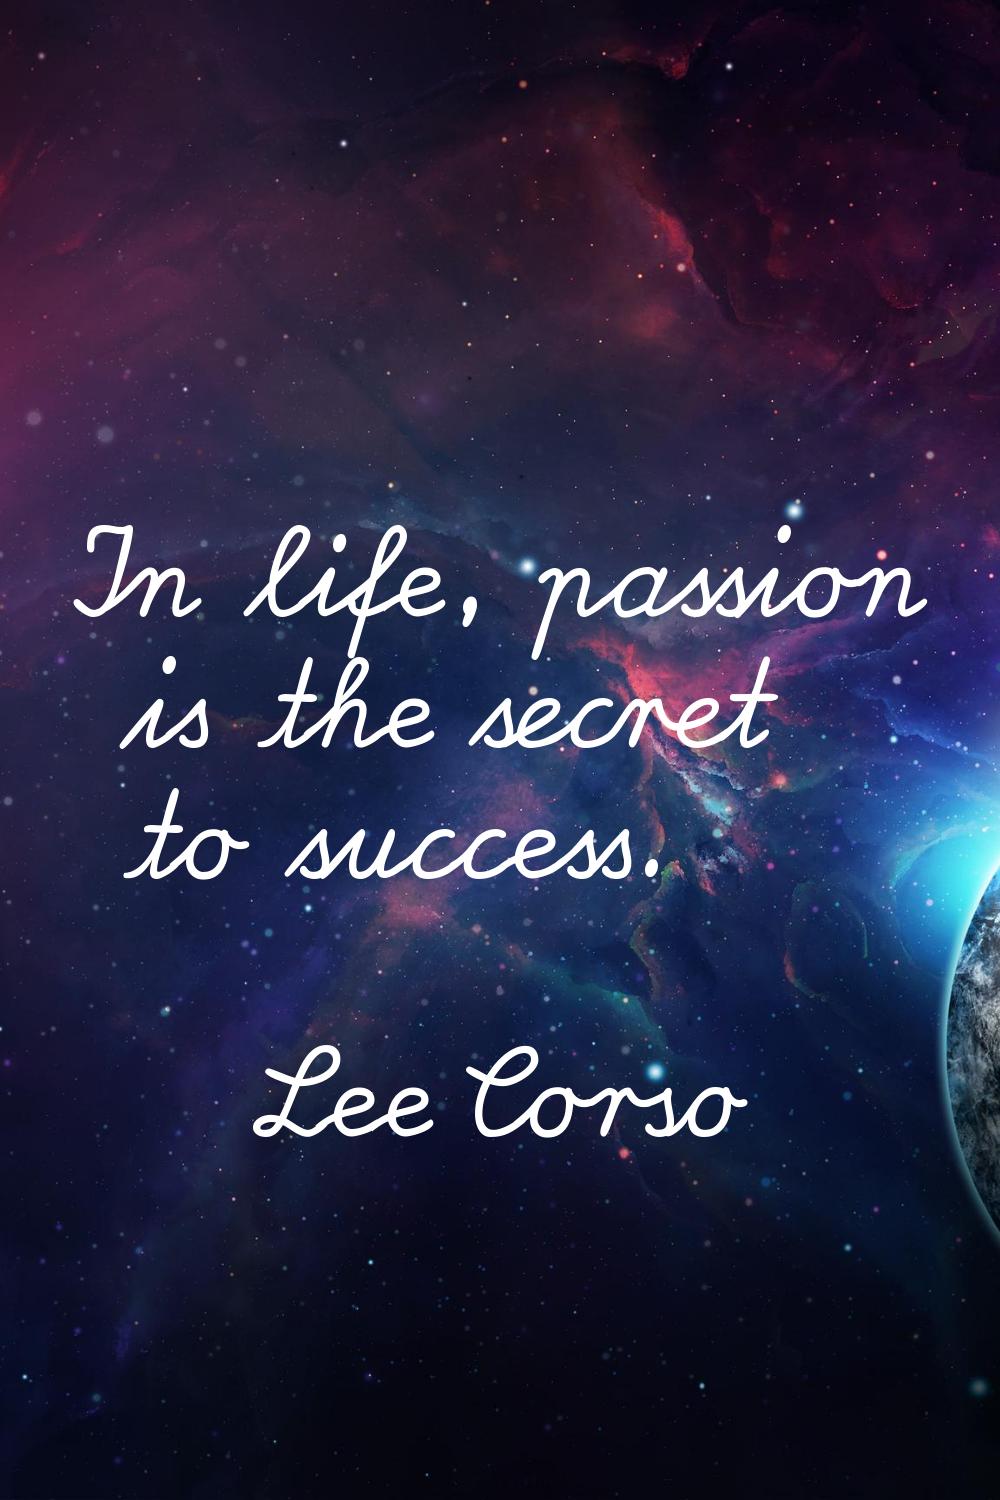 In life, passion is the secret to success.